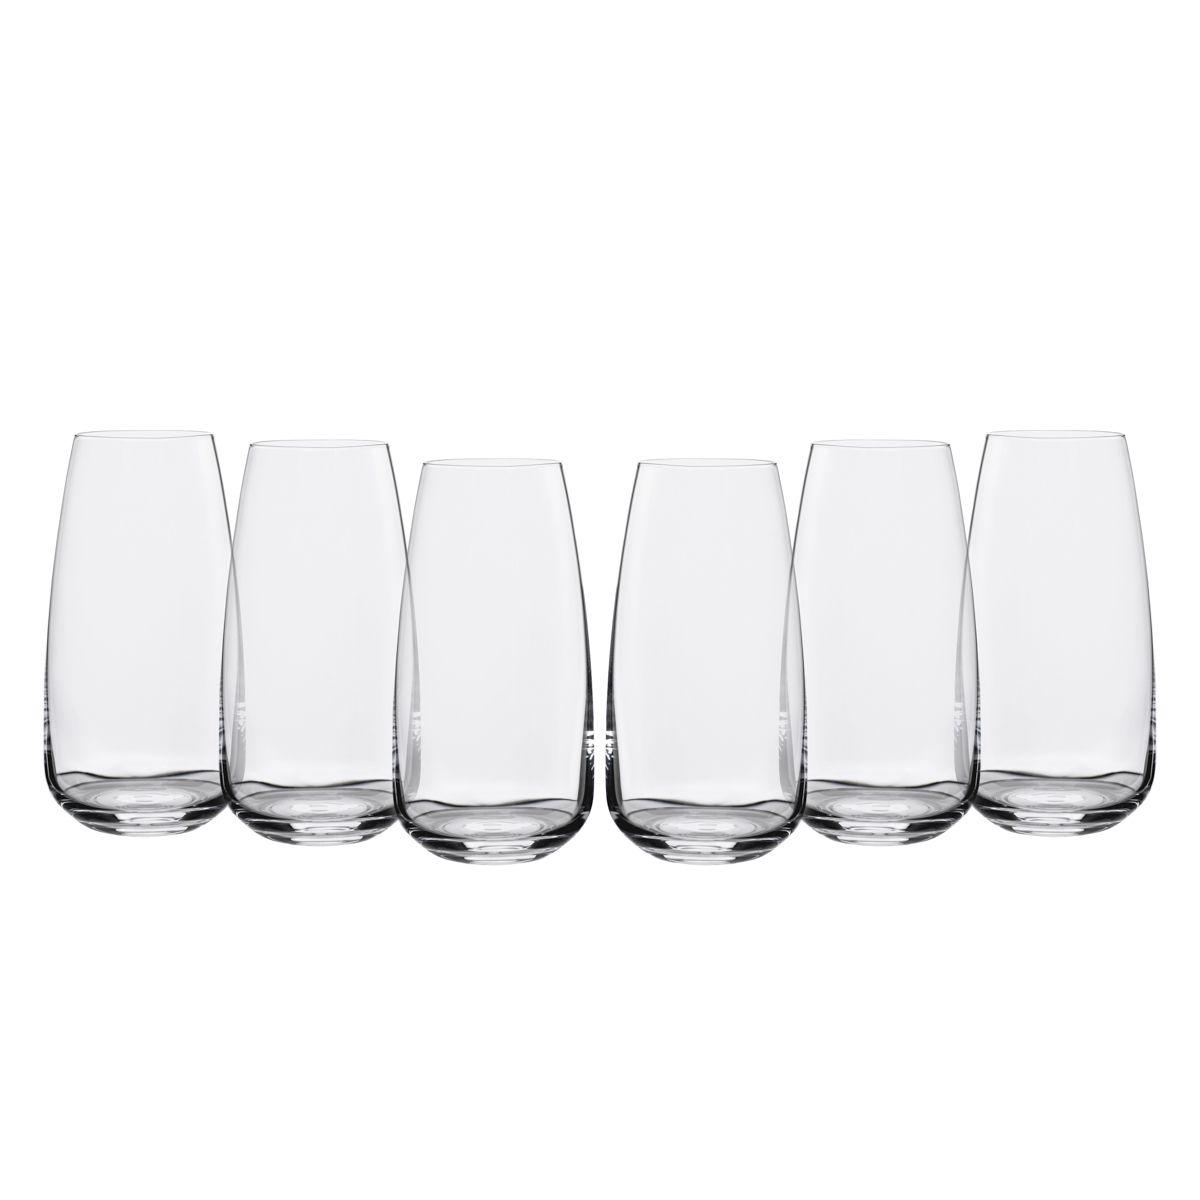 Anser Bohemia Drinking Glasses | Pack of 6 - Choice Stores